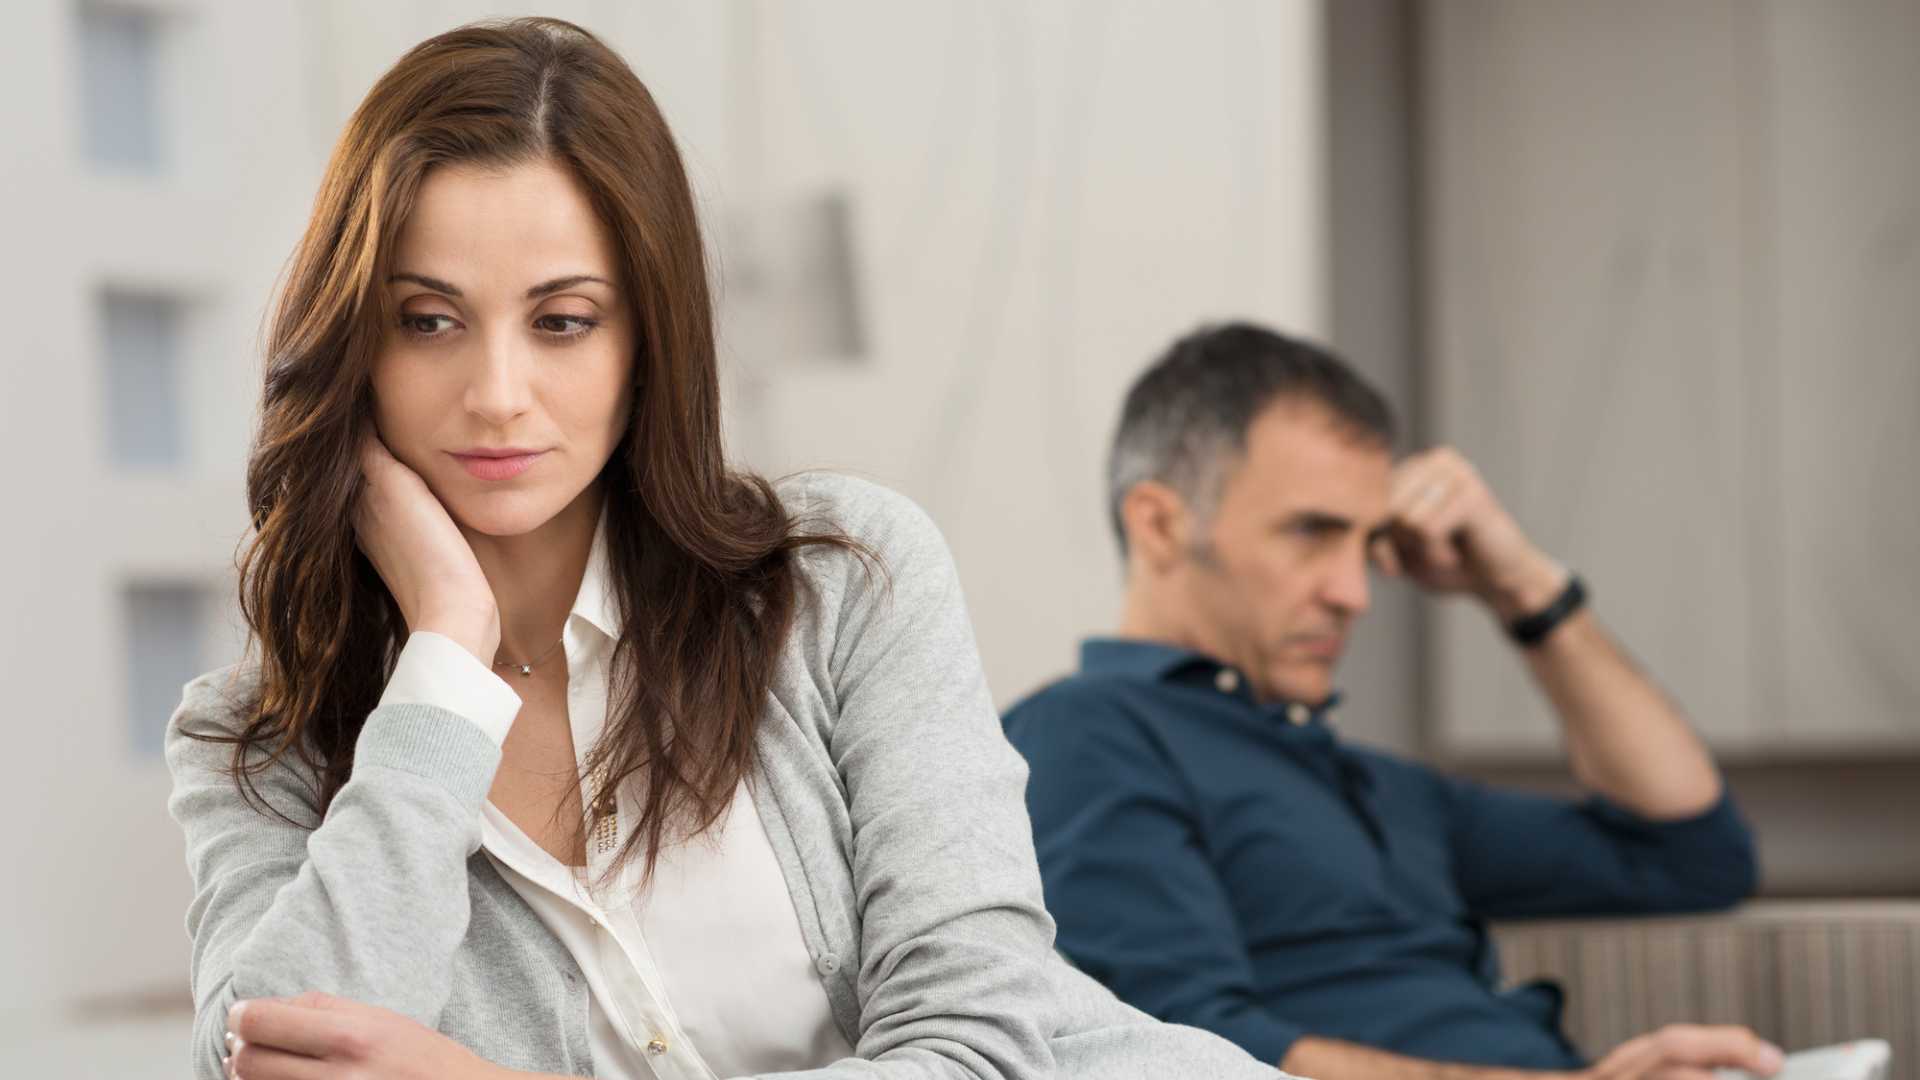 myths about divorce that prevent you from developing